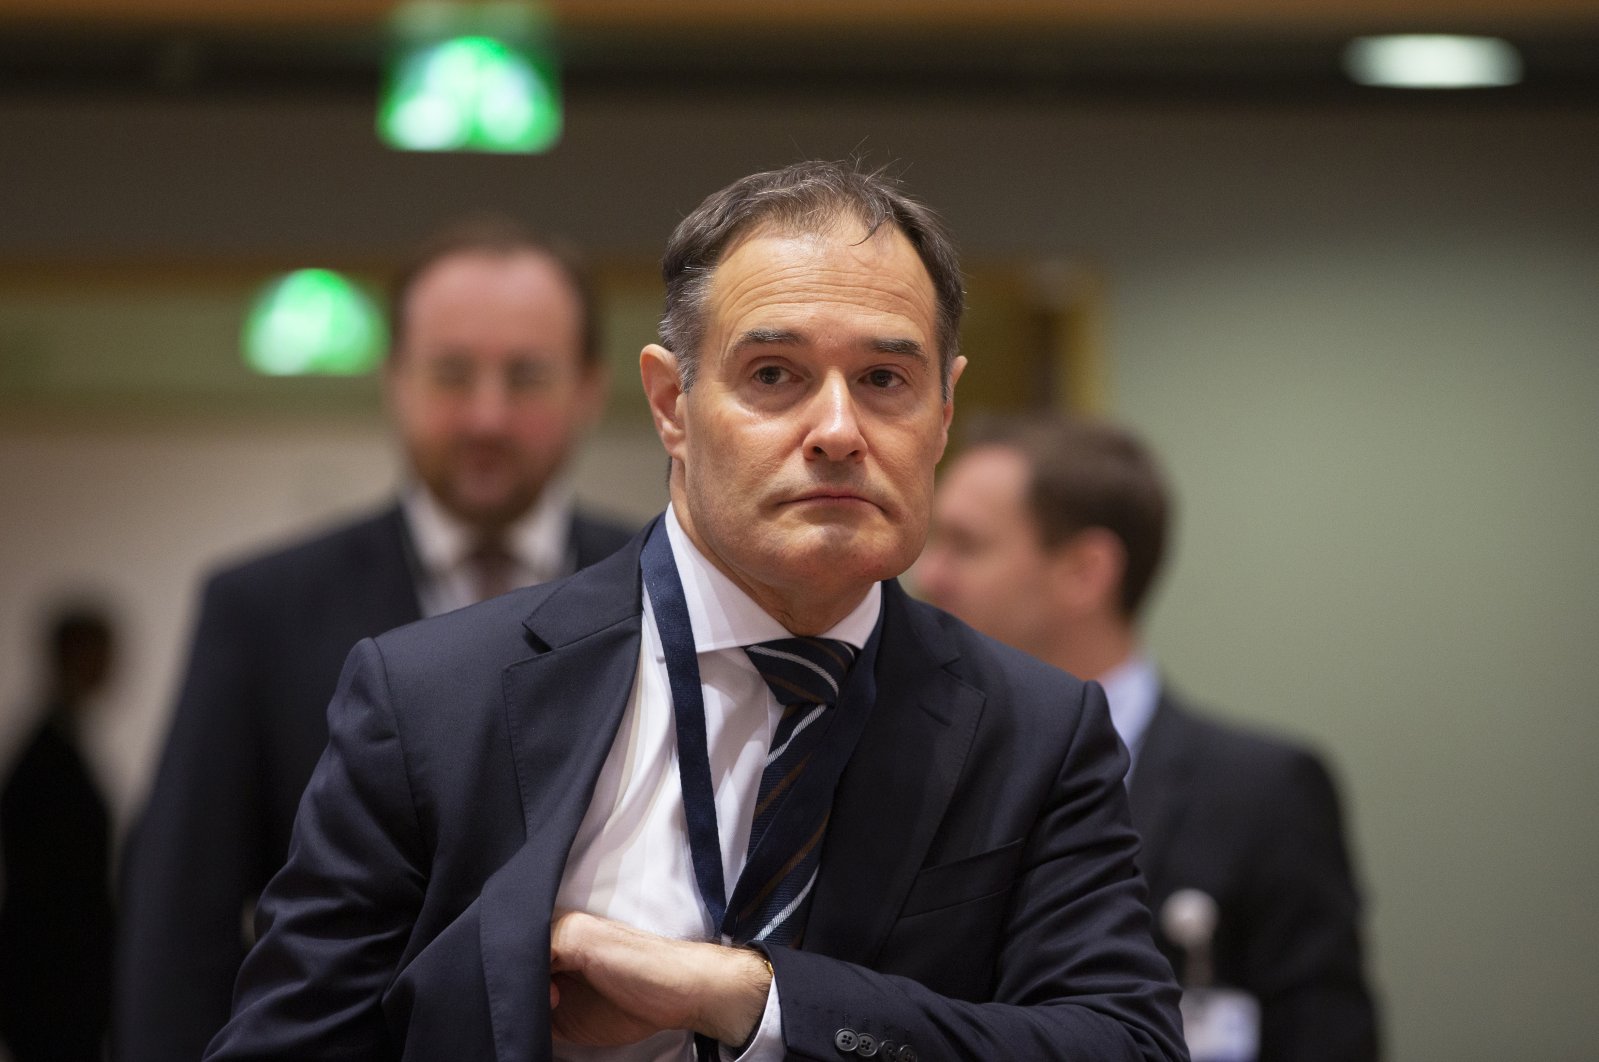 Fabrice Leggeri, executive director of Frontex, attends a meeting of EU interior ministers at the EU Council building in Brussels, Belgium, Dec. 2, 2019. The head of the European Union&#039;s border agency has offered to resign after allegations that Frontex was involved in illegal pushbacks of migrants, according to the European Commission and a German Interior Ministry spokesperson. (AP File Photo)